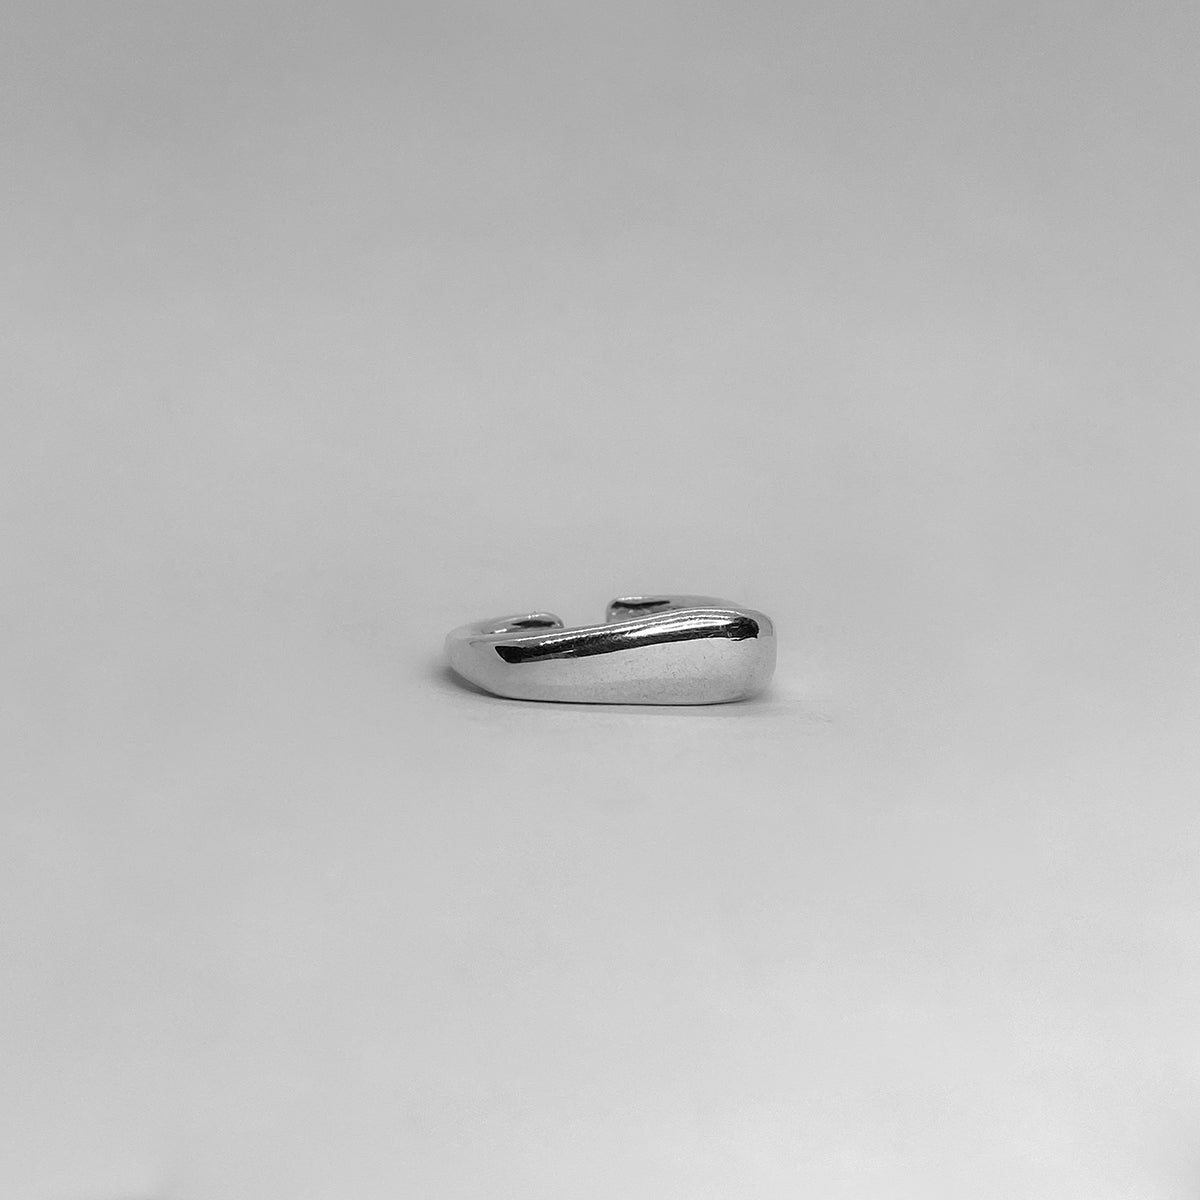 The Passion ring is a handcrafted piece made of 925 sterling silver. Its shape is square, with one edge thicker than the other. It is smooth and shiny